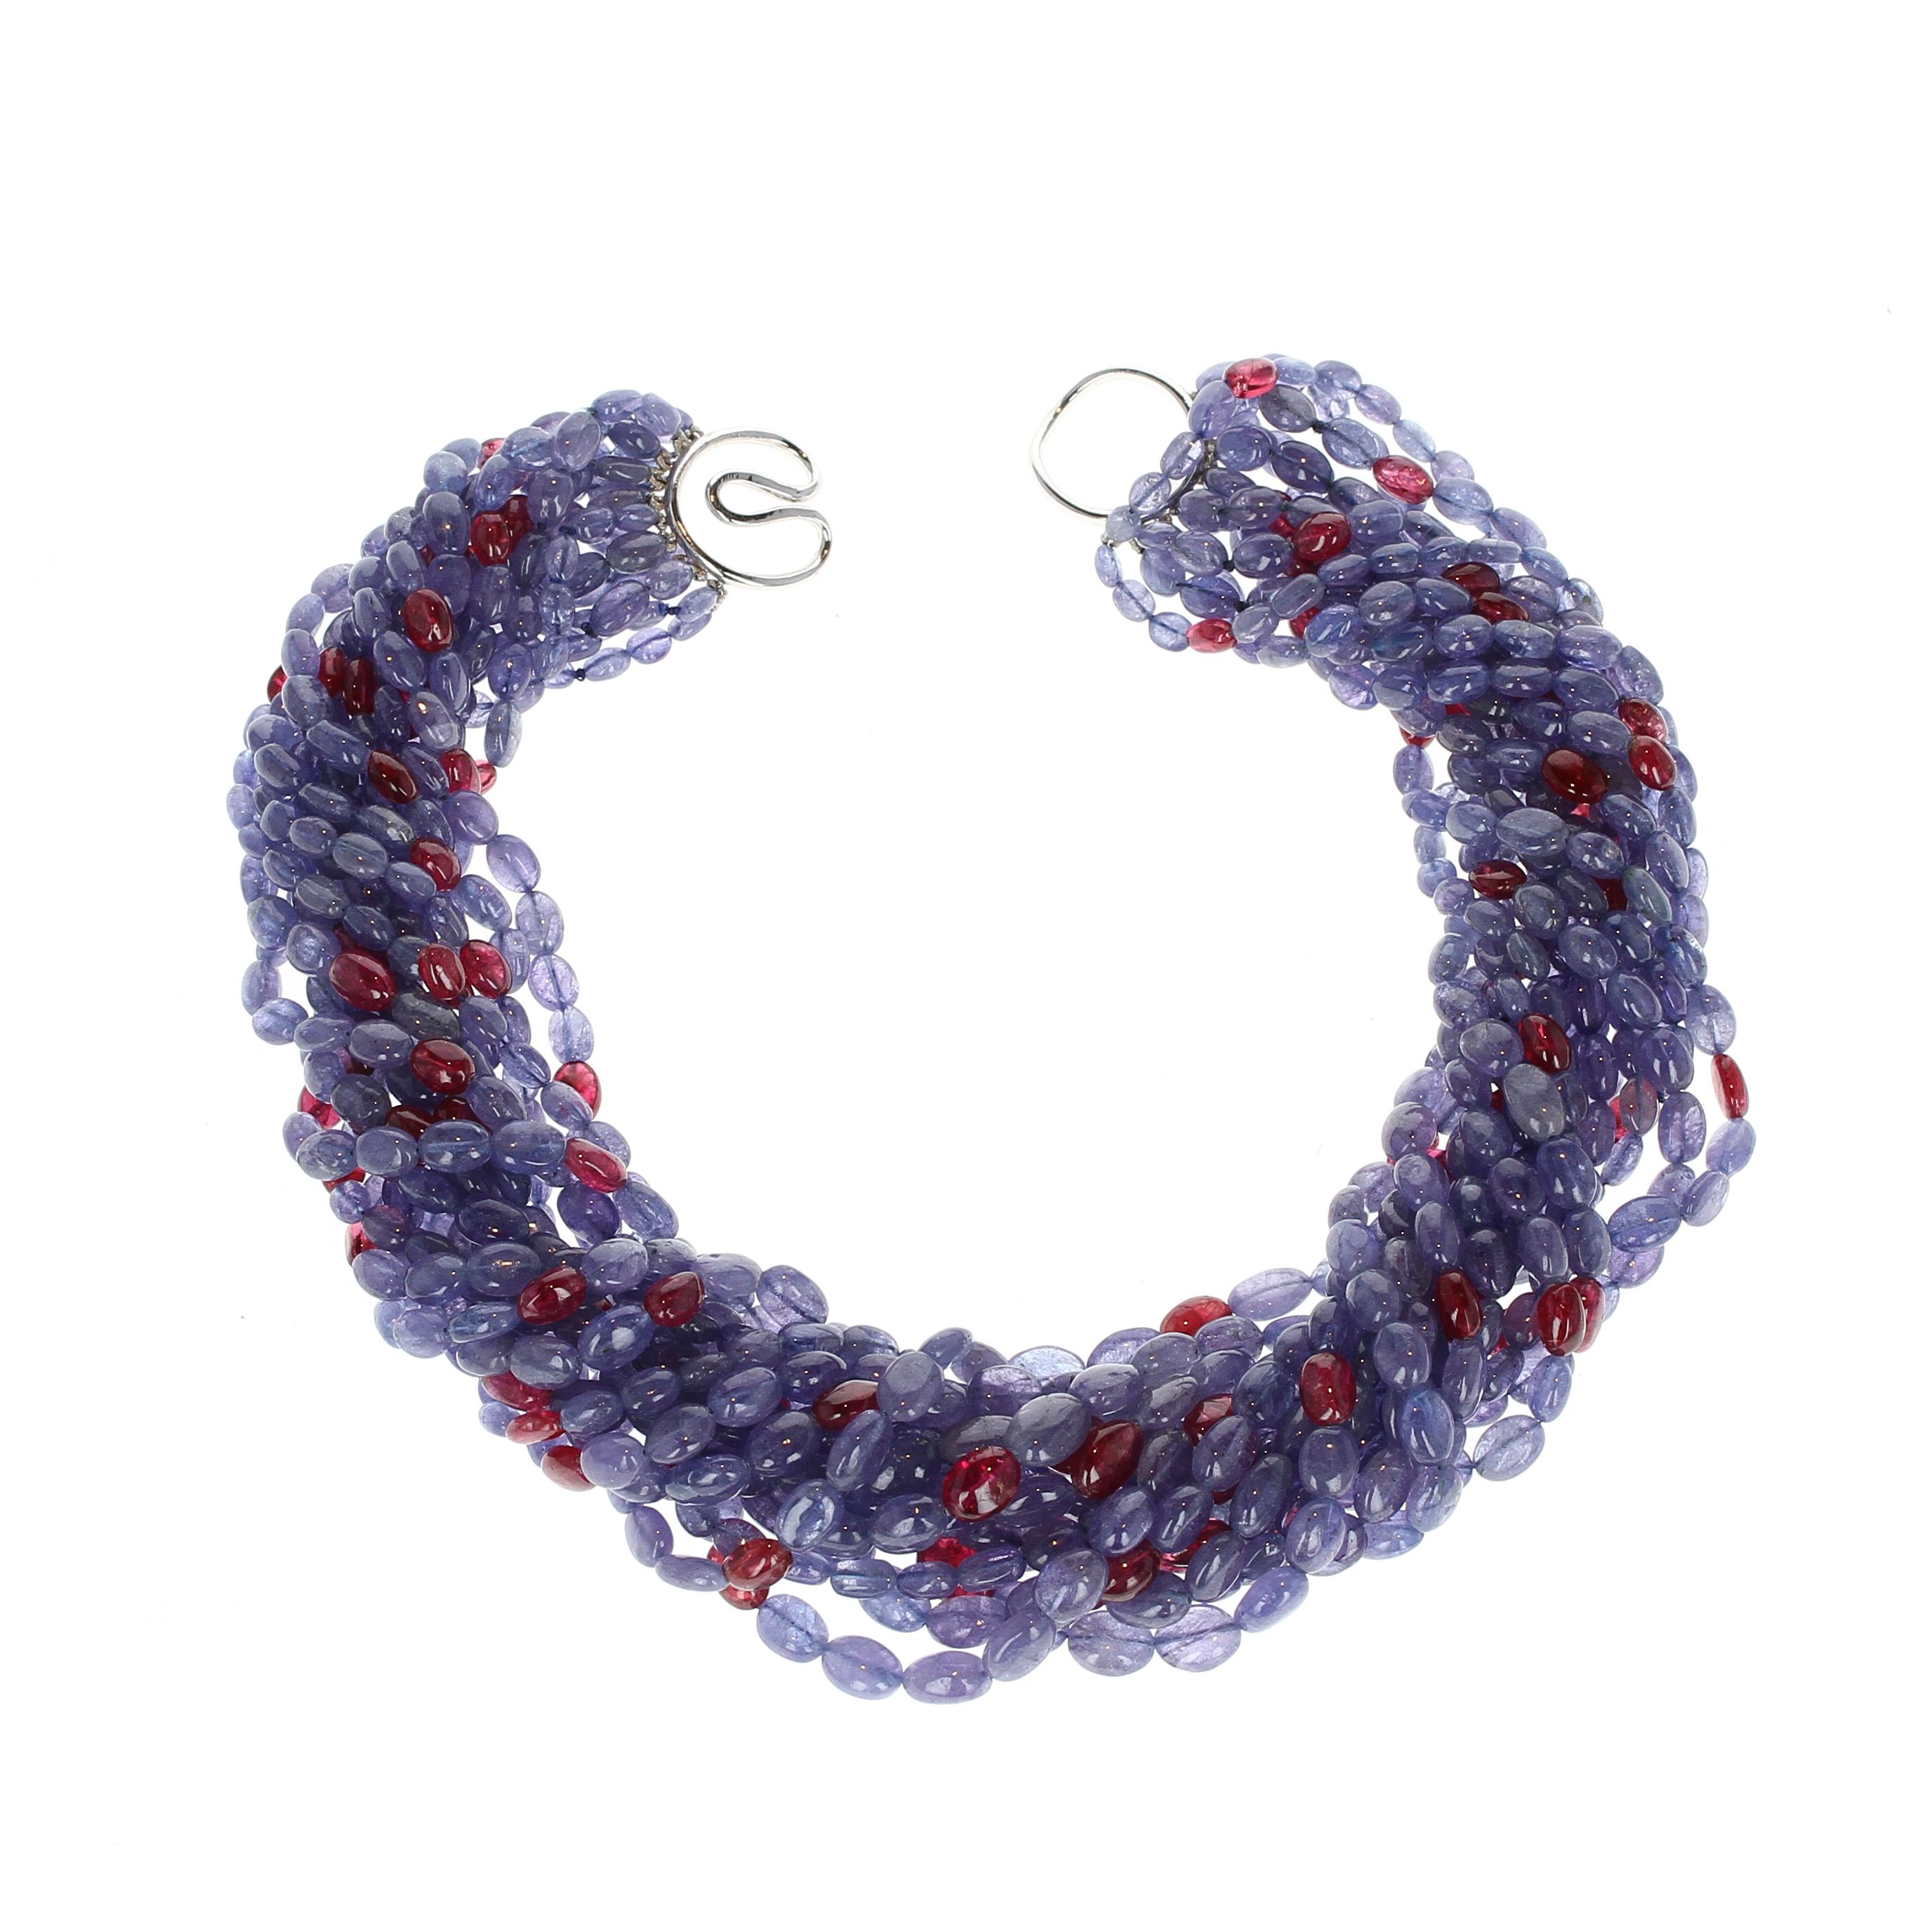 A tanzanite and spinel bead necklace with an 18kt white gold clasp; the total weight of the necklace is approximately 1,123 carats, length 17 inches.